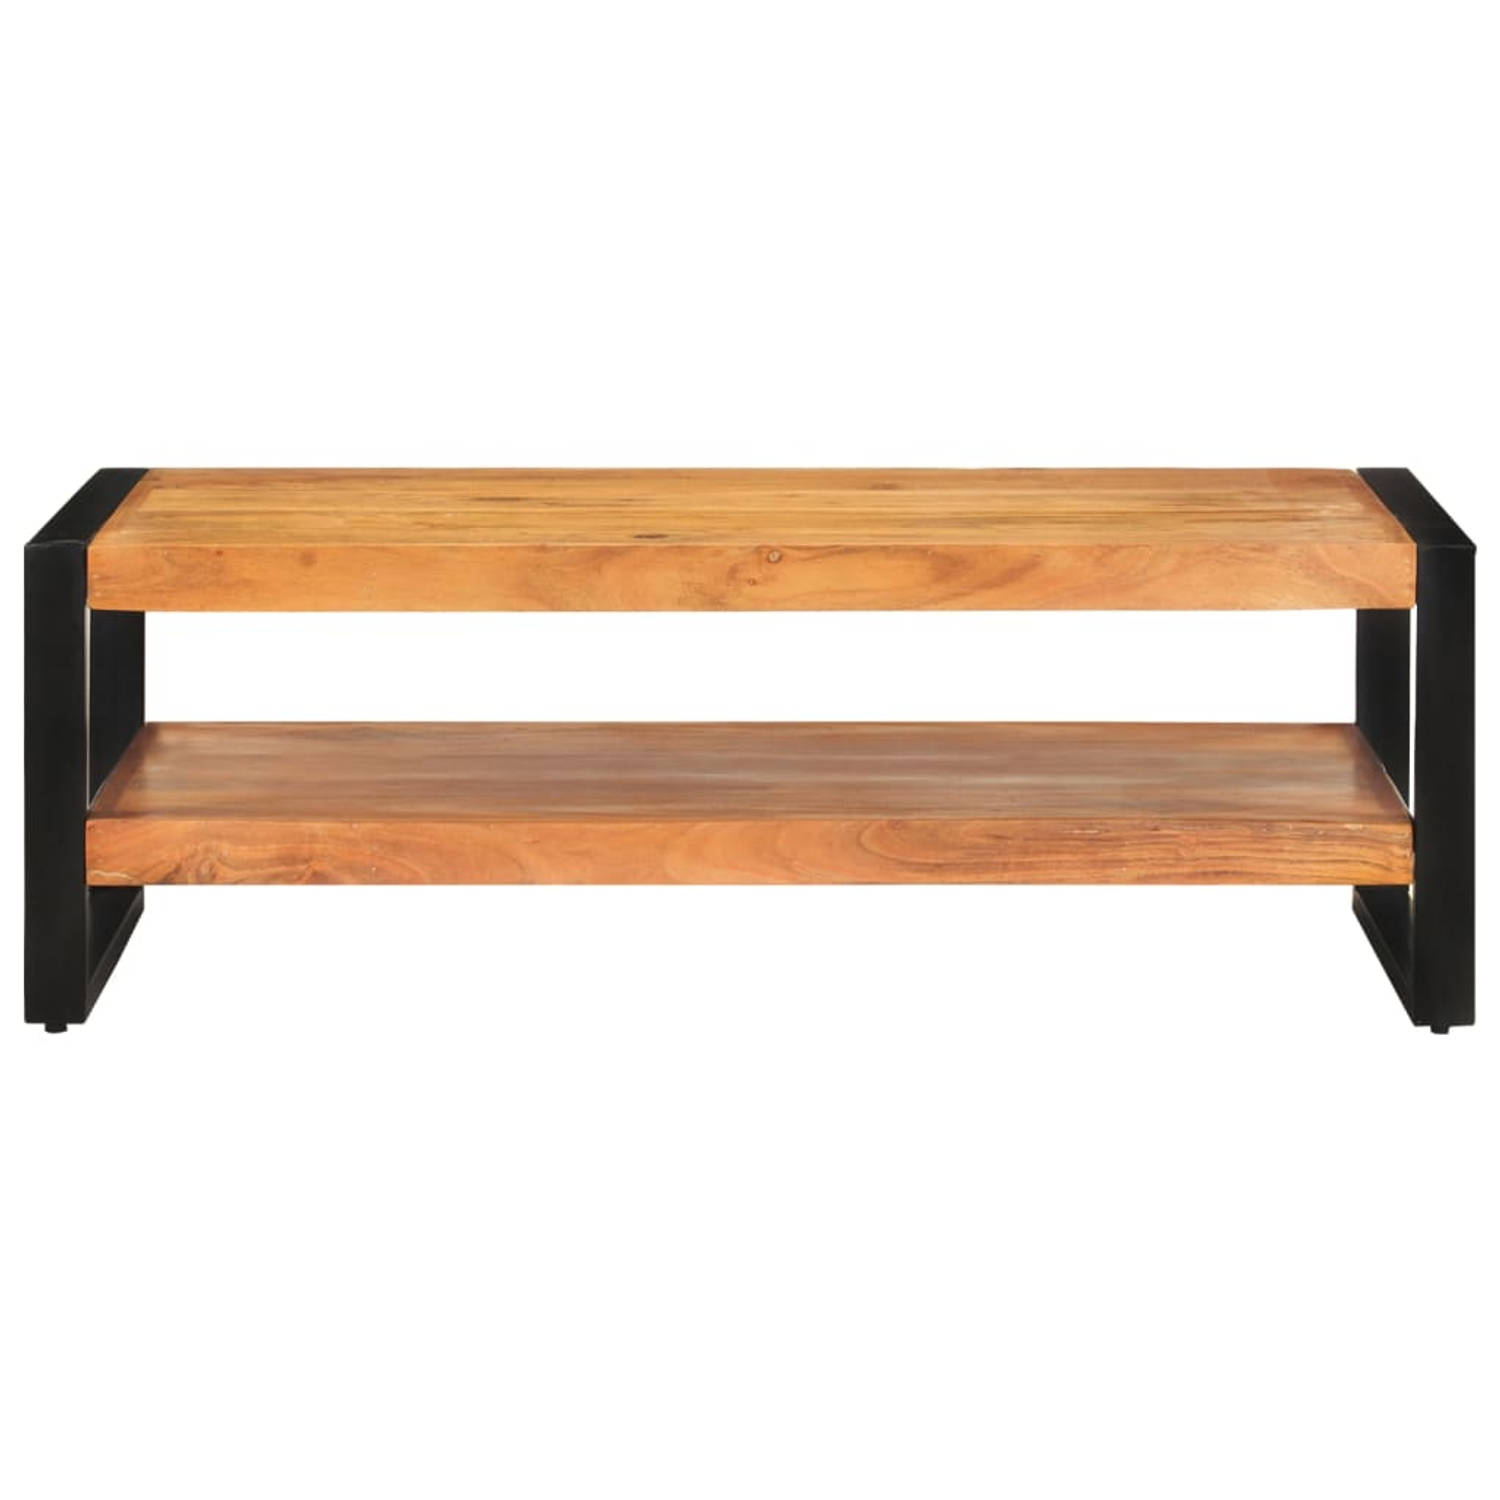 The Living Store Woonkamertafel - Hout - Rustieke Charme - 120x60x40 cm - Massief Acaciahout